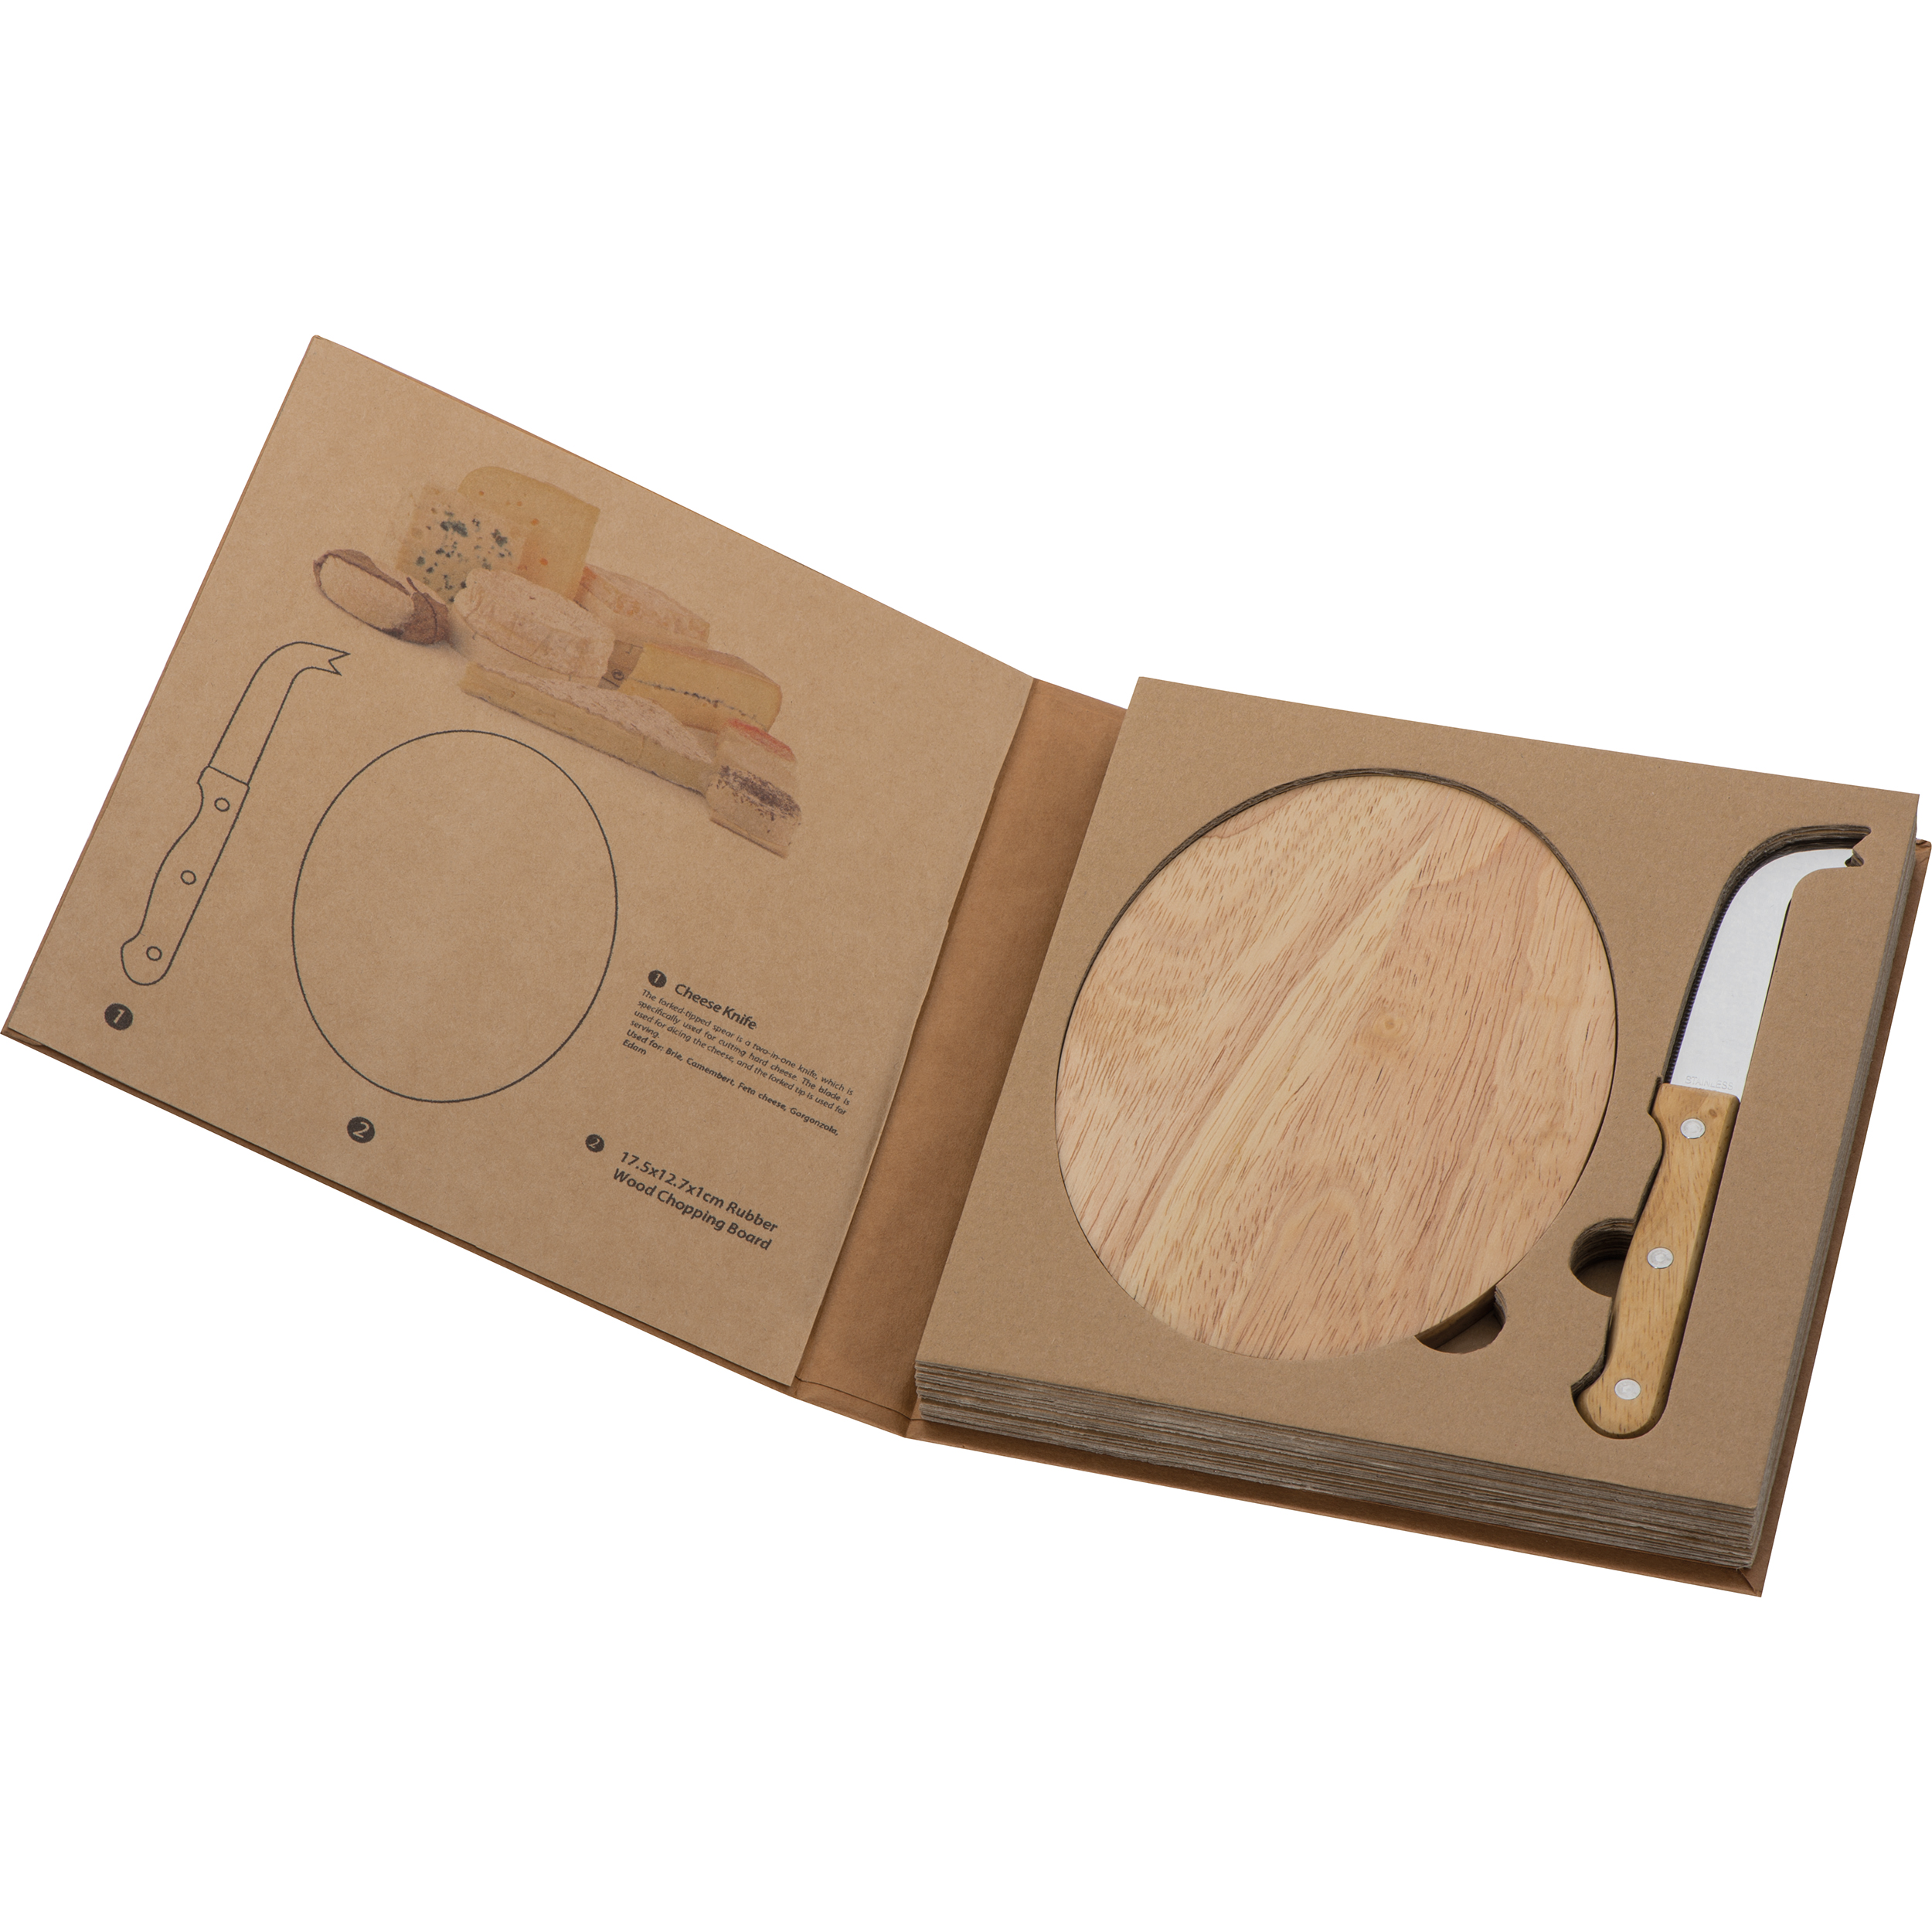 Cheese set with wooden cutting board